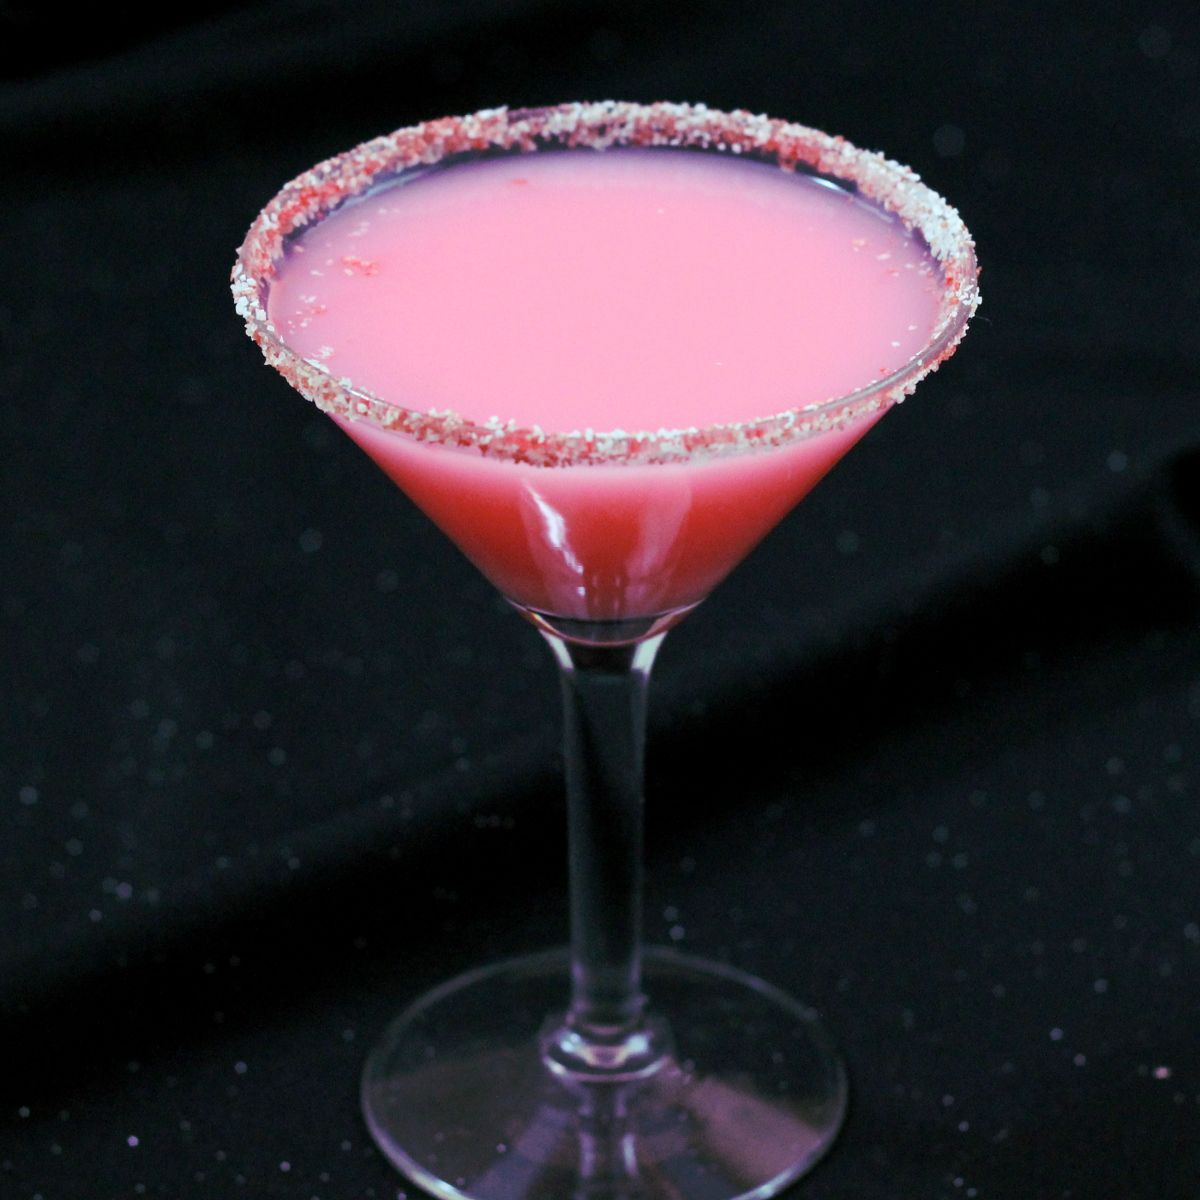 The Candy Cane Cocktail Has The Expected Peppermint Flavor Along With tout Cocktail Bonbon Candy Cane Spritzer Cocktail 